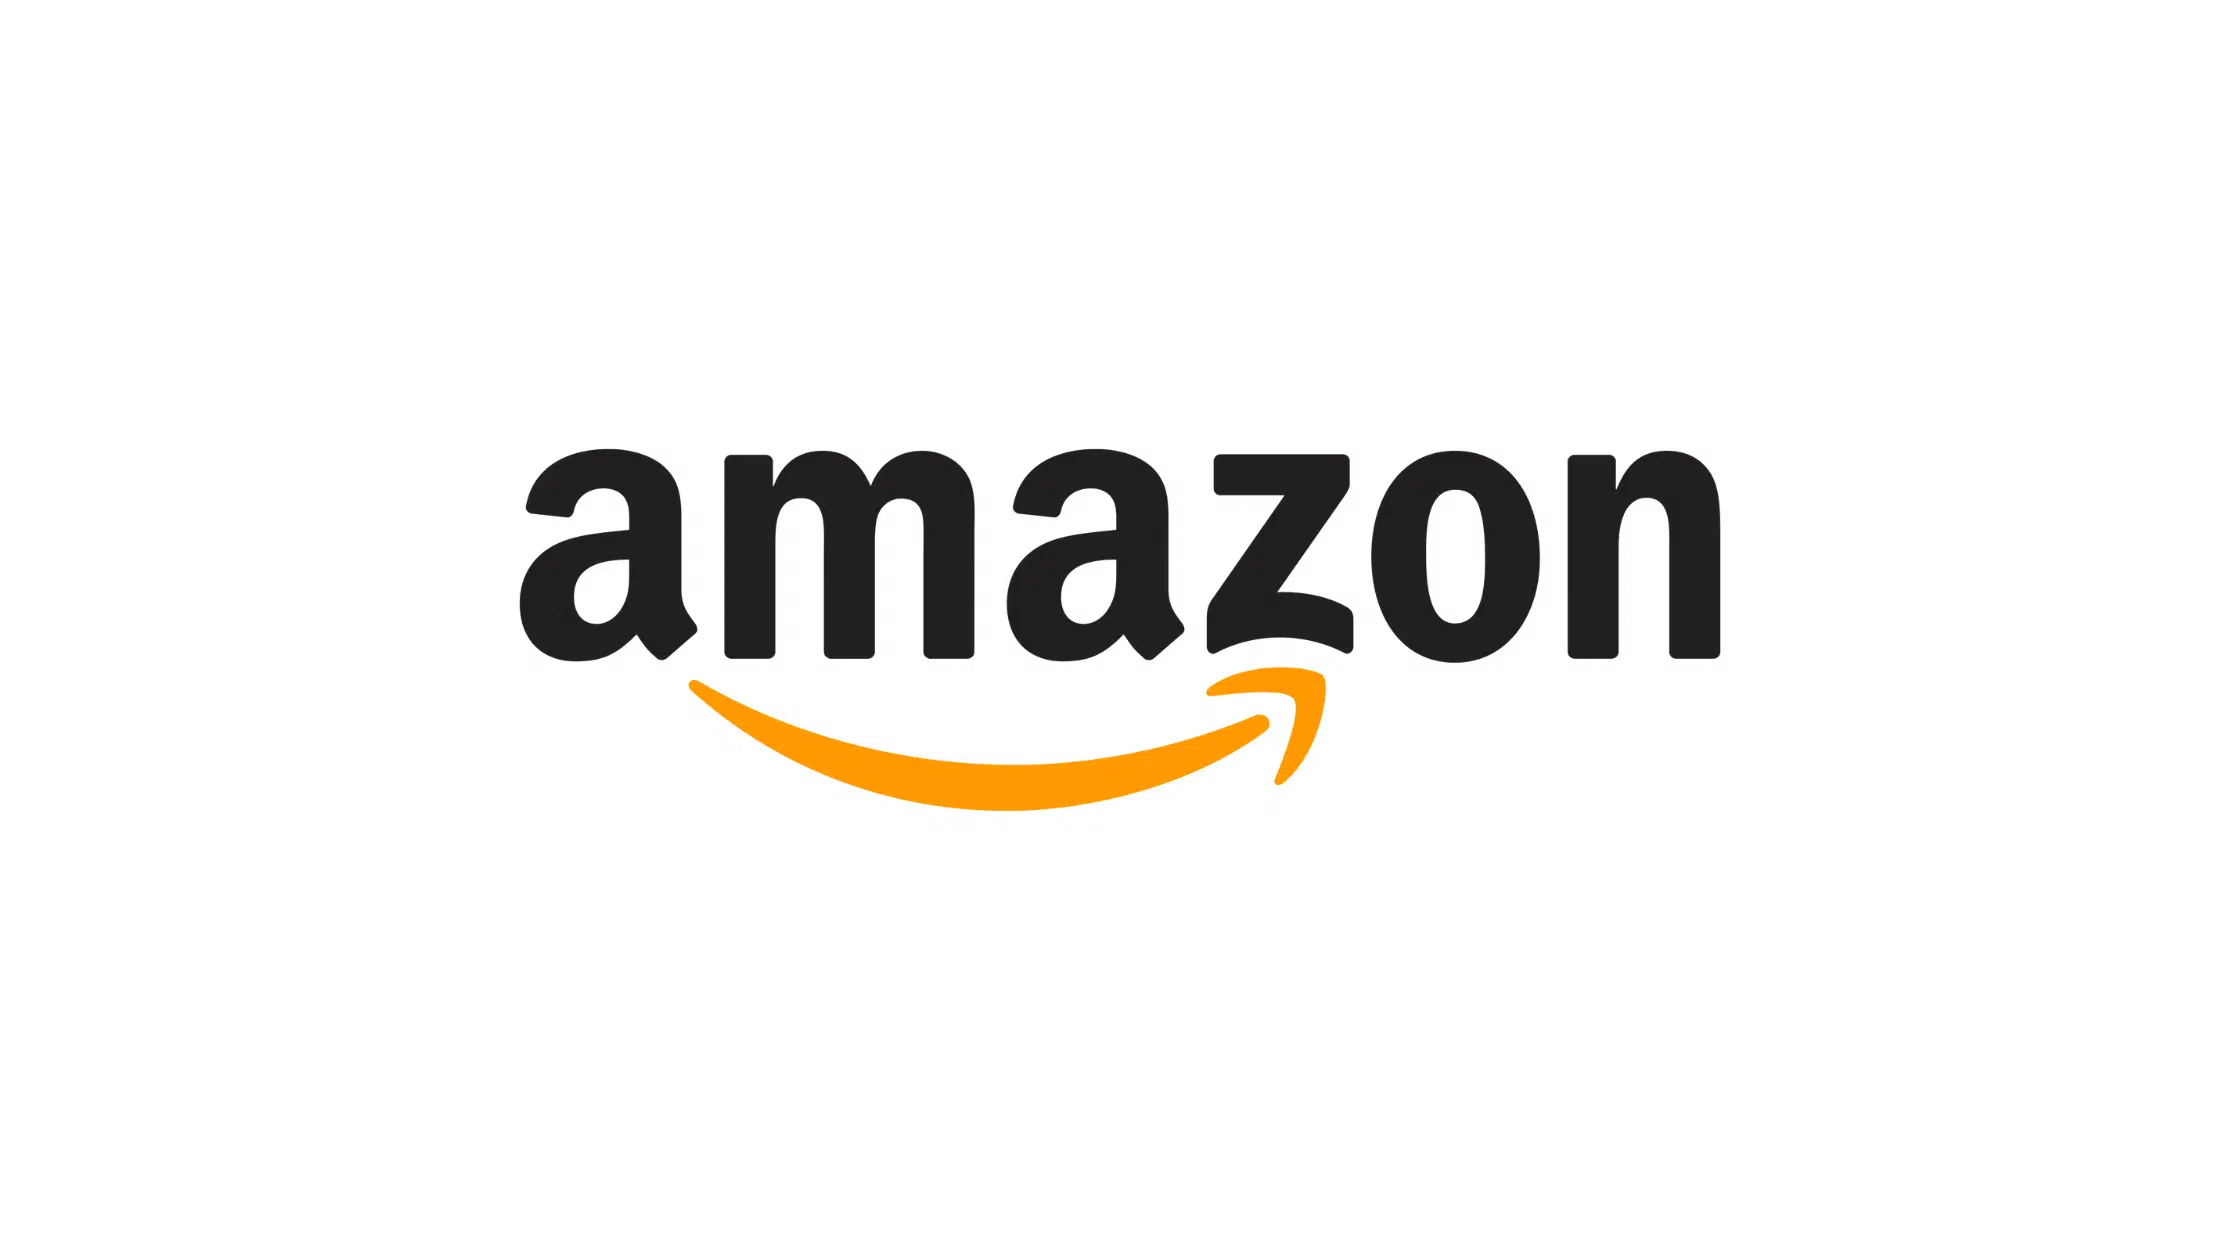 What Font Does Amazon Use?